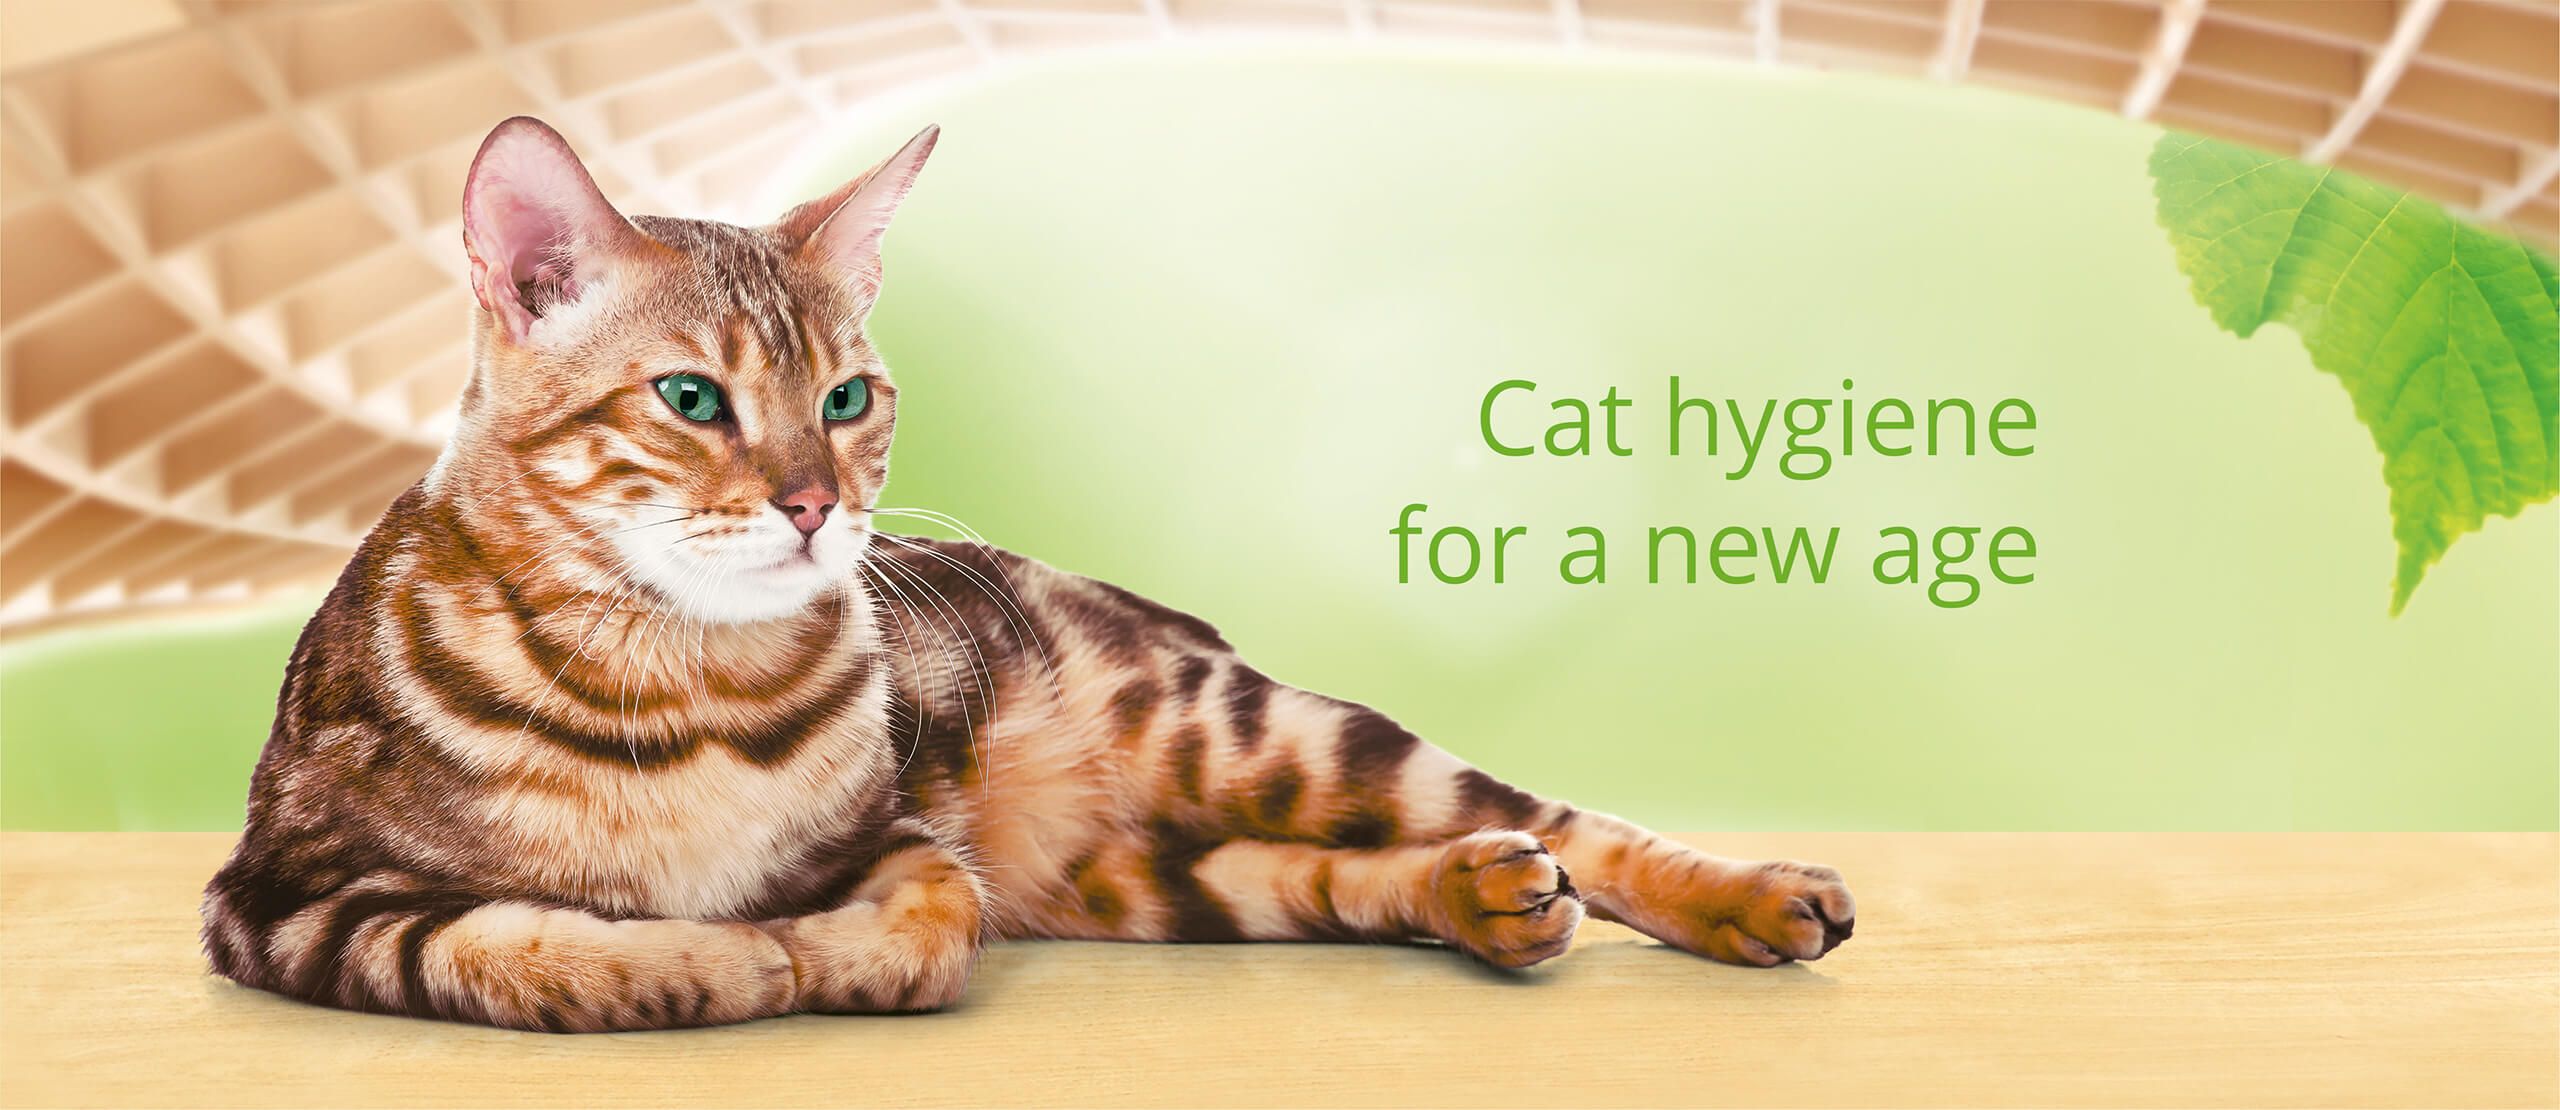 Cat hygiene for a new age